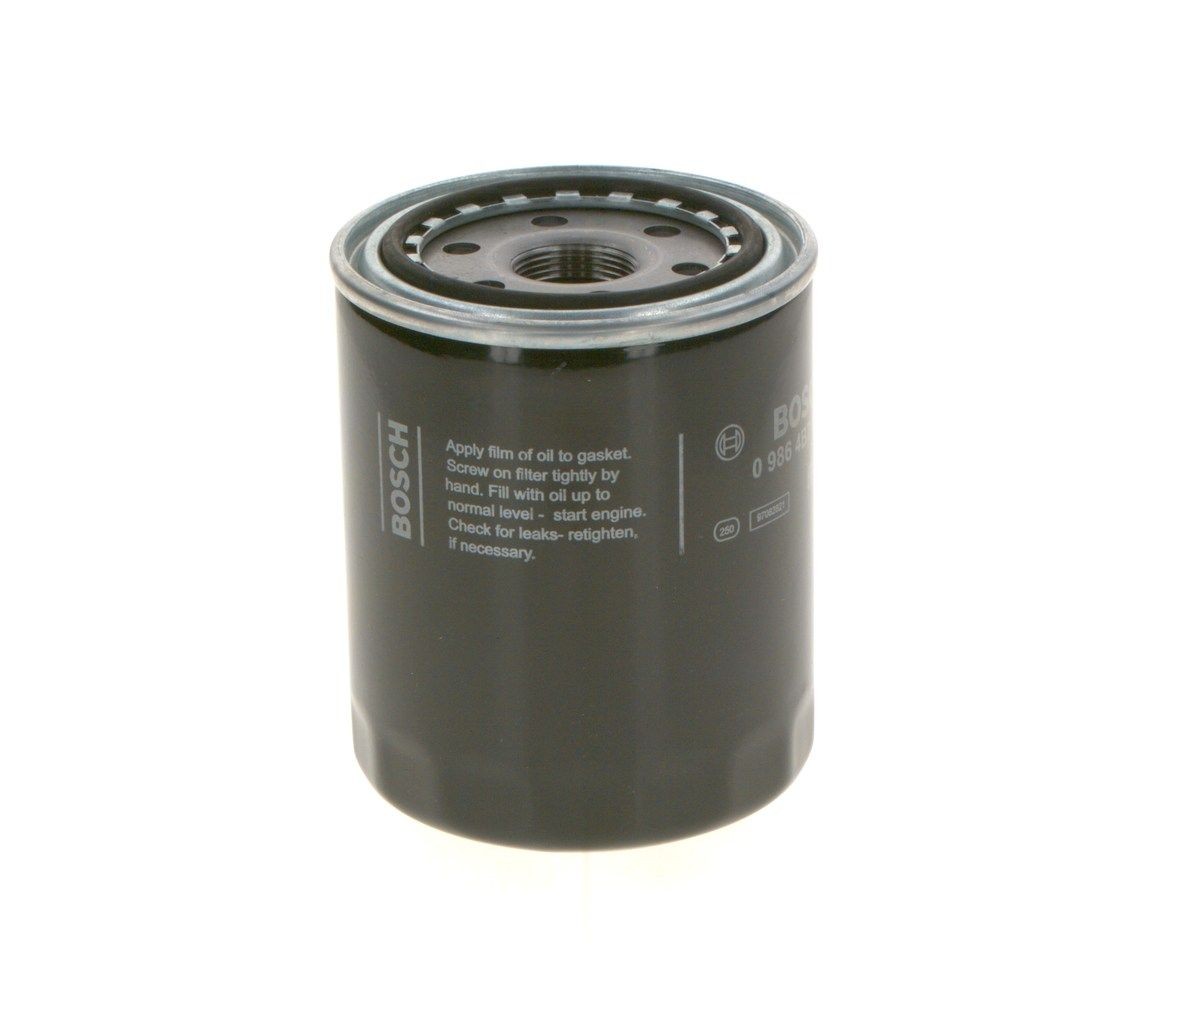 09864B7053 Oil filter PM 053 BOSCH M 26 x 1,5, Spin-on Filter